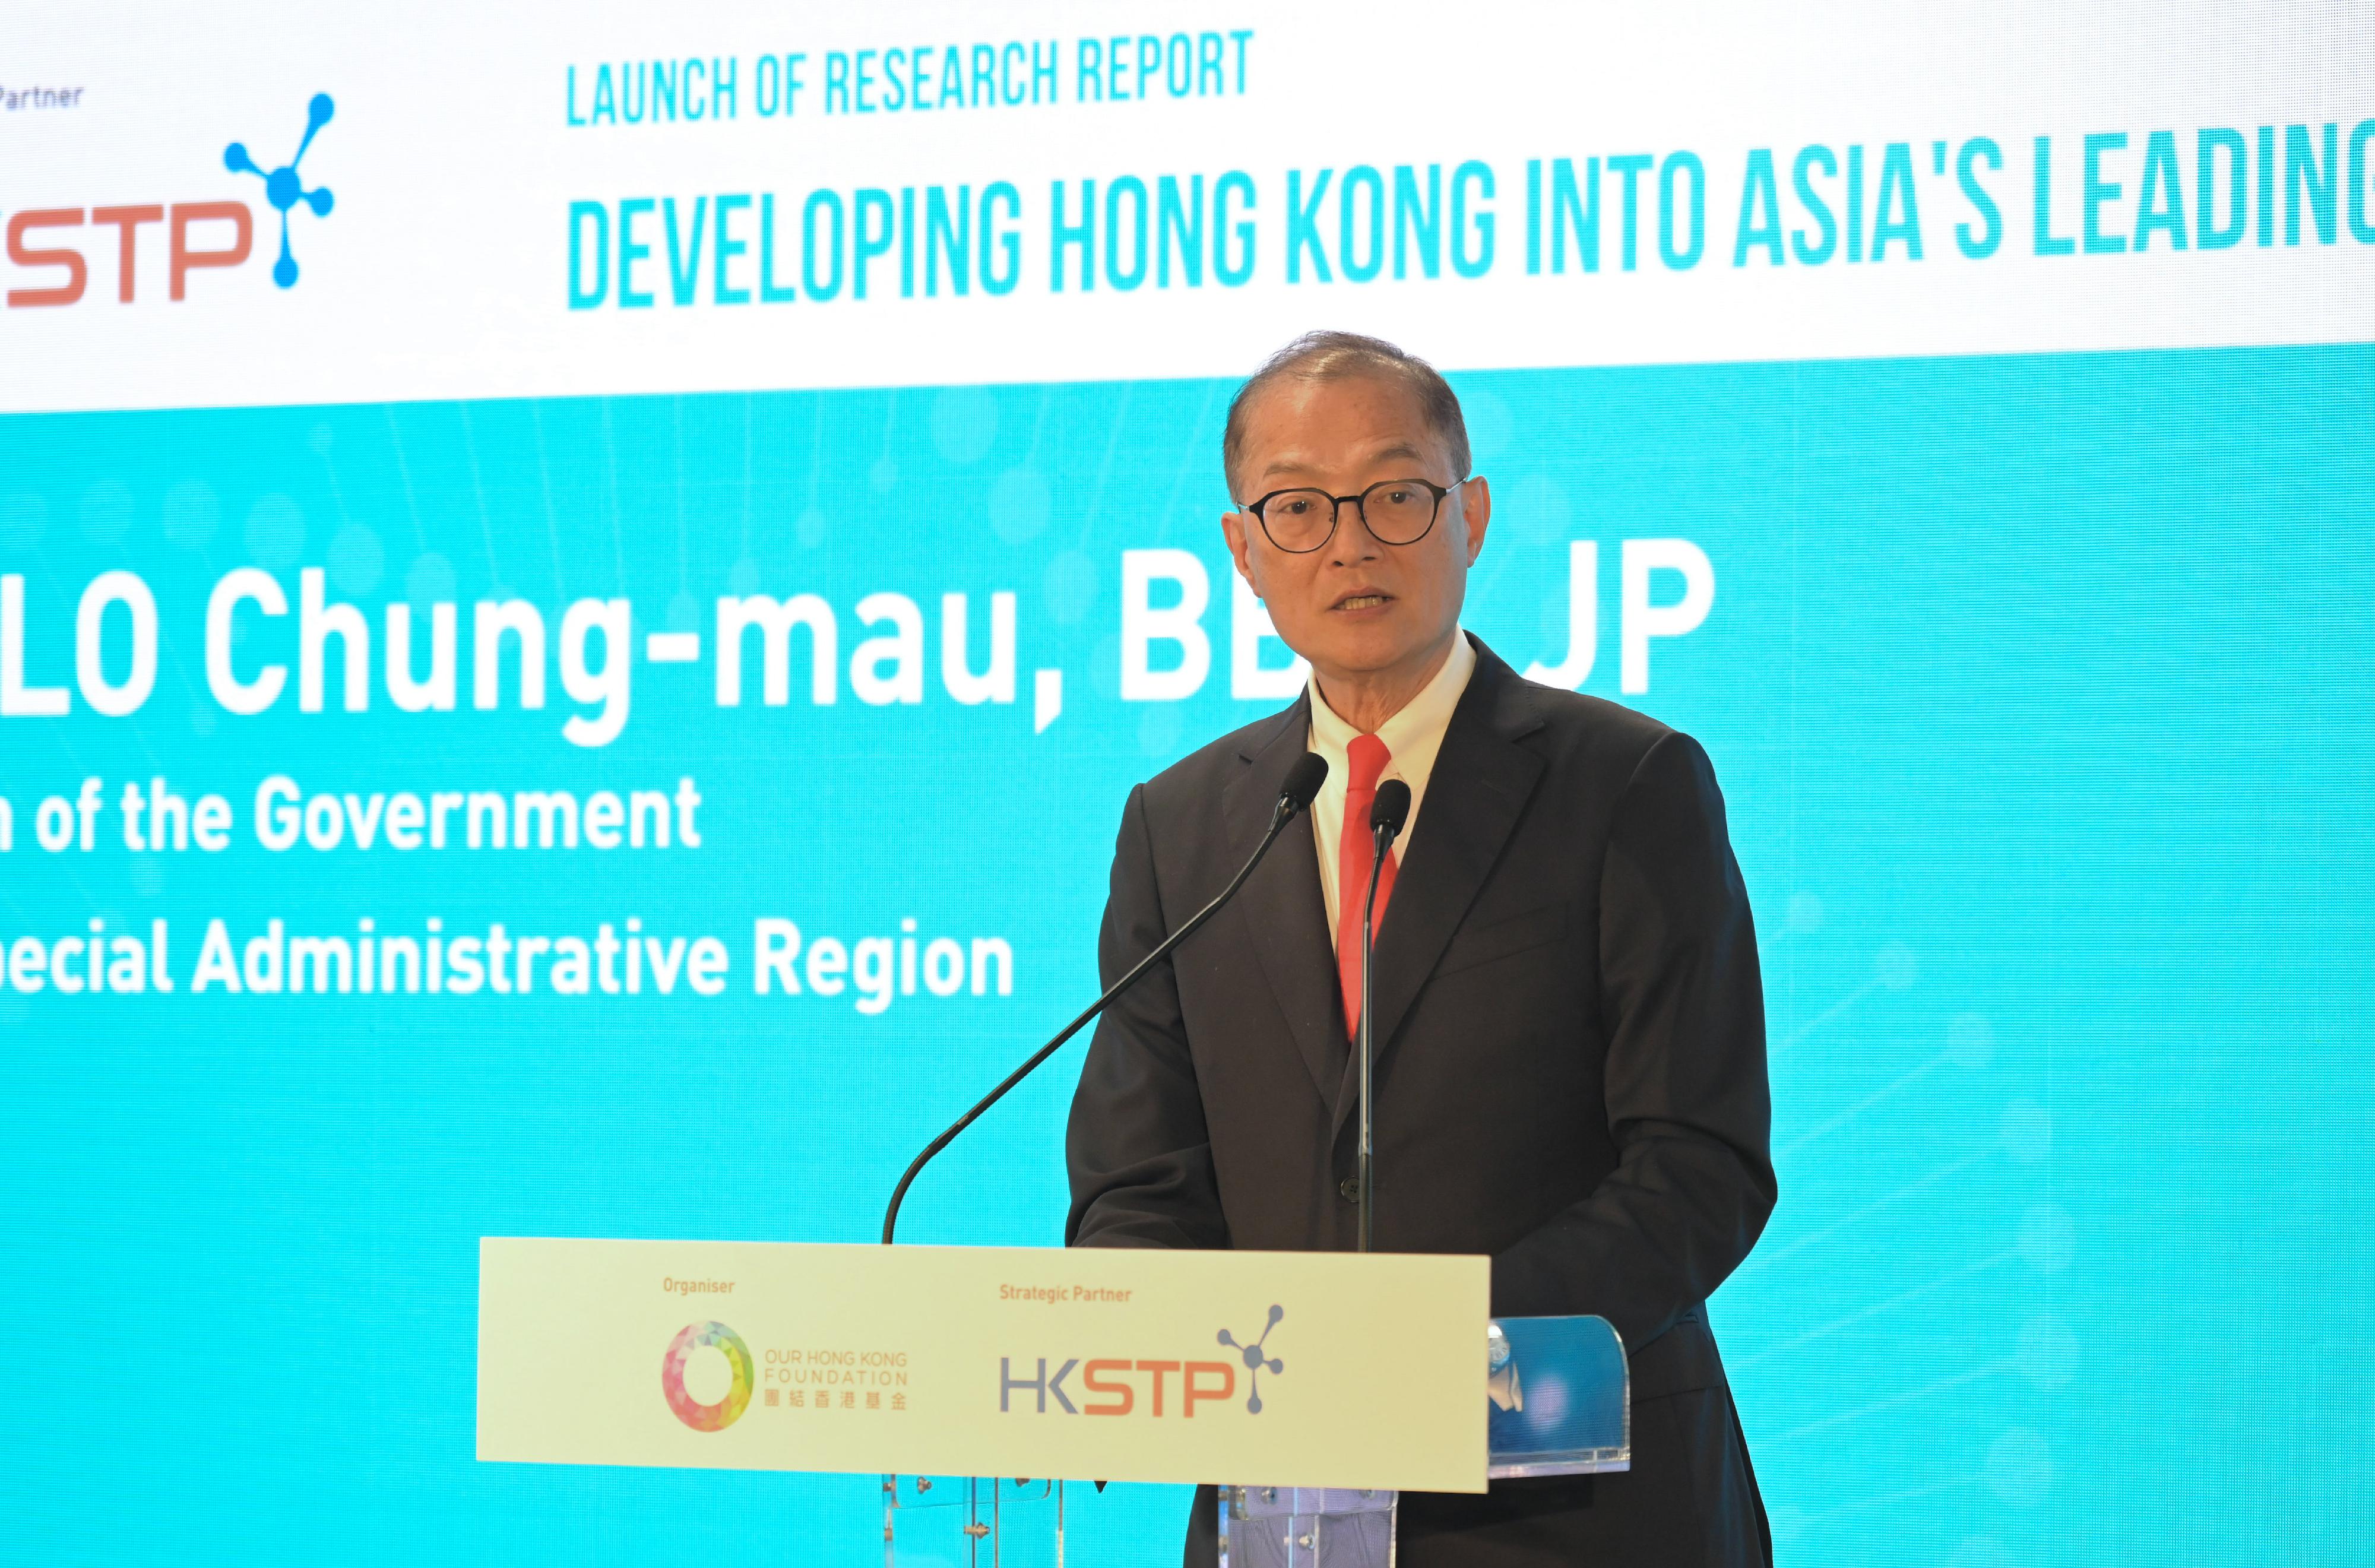 The Secretary for Health, Professor Lo Chung-mau, delivers a speech at the Our Hong Kong Foundation and Hong Kong Science and Technology Parks Corporation Joint BioTech Research Report Launch on“Developing Hong Kong into Asia's Leading Clinical Innovation Hub” today (November 30).
